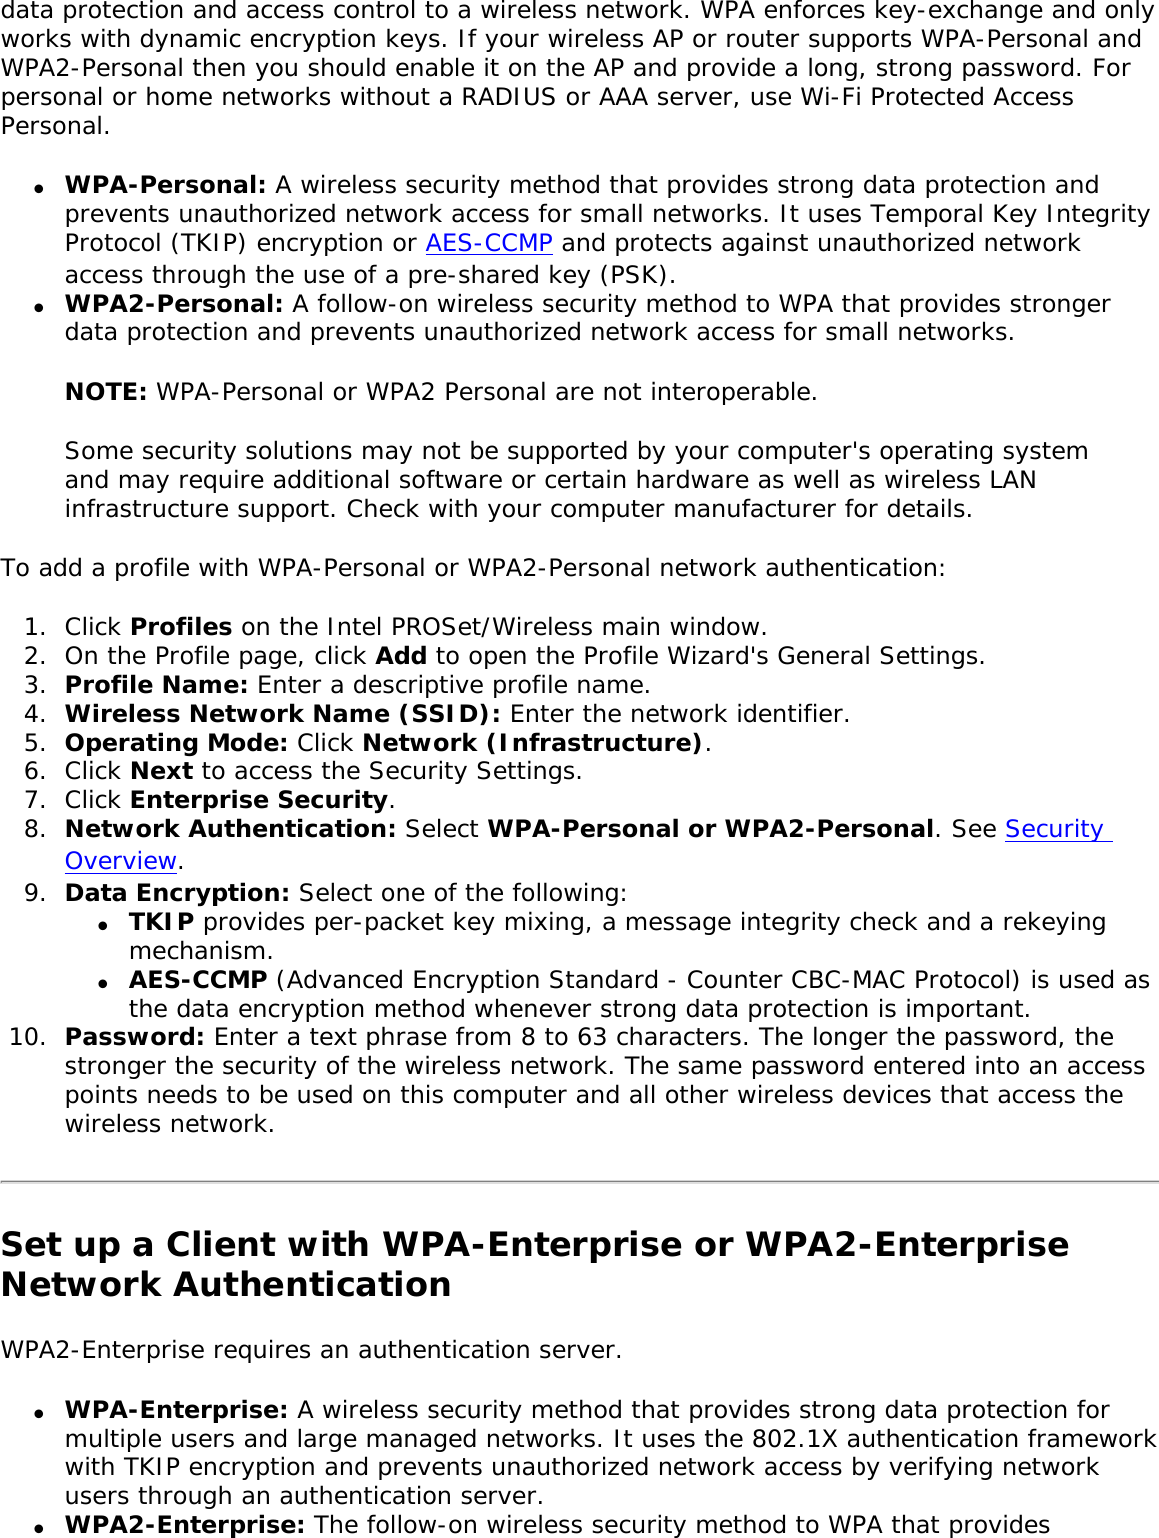 data protection and access control to a wireless network. WPA enforces key-exchange and only works with dynamic encryption keys. If your wireless AP or router supports WPA-Personal and WPA2-Personal then you should enable it on the AP and provide a long, strong password. For personal or home networks without a RADIUS or AAA server, use Wi-Fi Protected Access Personal. ●     WPA-Personal: A wireless security method that provides strong data protection and prevents unauthorized network access for small networks. It uses Temporal Key Integrity Protocol (TKIP) encryption or AES-CCMP and protects against unauthorized network access through the use of a pre-shared key (PSK).●     WPA2-Personal: A follow-on wireless security method to WPA that provides stronger data protection and prevents unauthorized network access for small networks. NOTE: WPA-Personal or WPA2 Personal are not interoperable. Some security solutions may not be supported by your computer&apos;s operating system and may require additional software or certain hardware as well as wireless LAN infrastructure support. Check with your computer manufacturer for details. To add a profile with WPA-Personal or WPA2-Personal network authentication: 1.  Click Profiles on the Intel PROSet/Wireless main window. 2.  On the Profile page, click Add to open the Profile Wizard&apos;s General Settings.3.  Profile Name: Enter a descriptive profile name.4.  Wireless Network Name (SSID): Enter the network identifier. 5.  Operating Mode: Click Network (Infrastructure). 6.  Click Next to access the Security Settings. 7.  Click Enterprise Security.8.  Network Authentication: Select WPA-Personal or WPA2-Personal. See Security Overview.9.  Data Encryption: Select one of the following: ●     TKIP provides per-packet key mixing, a message integrity check and a rekeying mechanism.●     AES-CCMP (Advanced Encryption Standard - Counter CBC-MAC Protocol) is used as the data encryption method whenever strong data protection is important. 10.  Password: Enter a text phrase from 8 to 63 characters. The longer the password, the stronger the security of the wireless network. The same password entered into an access points needs to be used on this computer and all other wireless devices that access the wireless network. Set up a Client with WPA-Enterprise or WPA2-Enterprise Network AuthenticationWPA2-Enterprise requires an authentication server. ●     WPA-Enterprise: A wireless security method that provides strong data protection for multiple users and large managed networks. It uses the 802.1X authentication framework with TKIP encryption and prevents unauthorized network access by verifying network users through an authentication server. ●     WPA2-Enterprise: The follow-on wireless security method to WPA that provides 